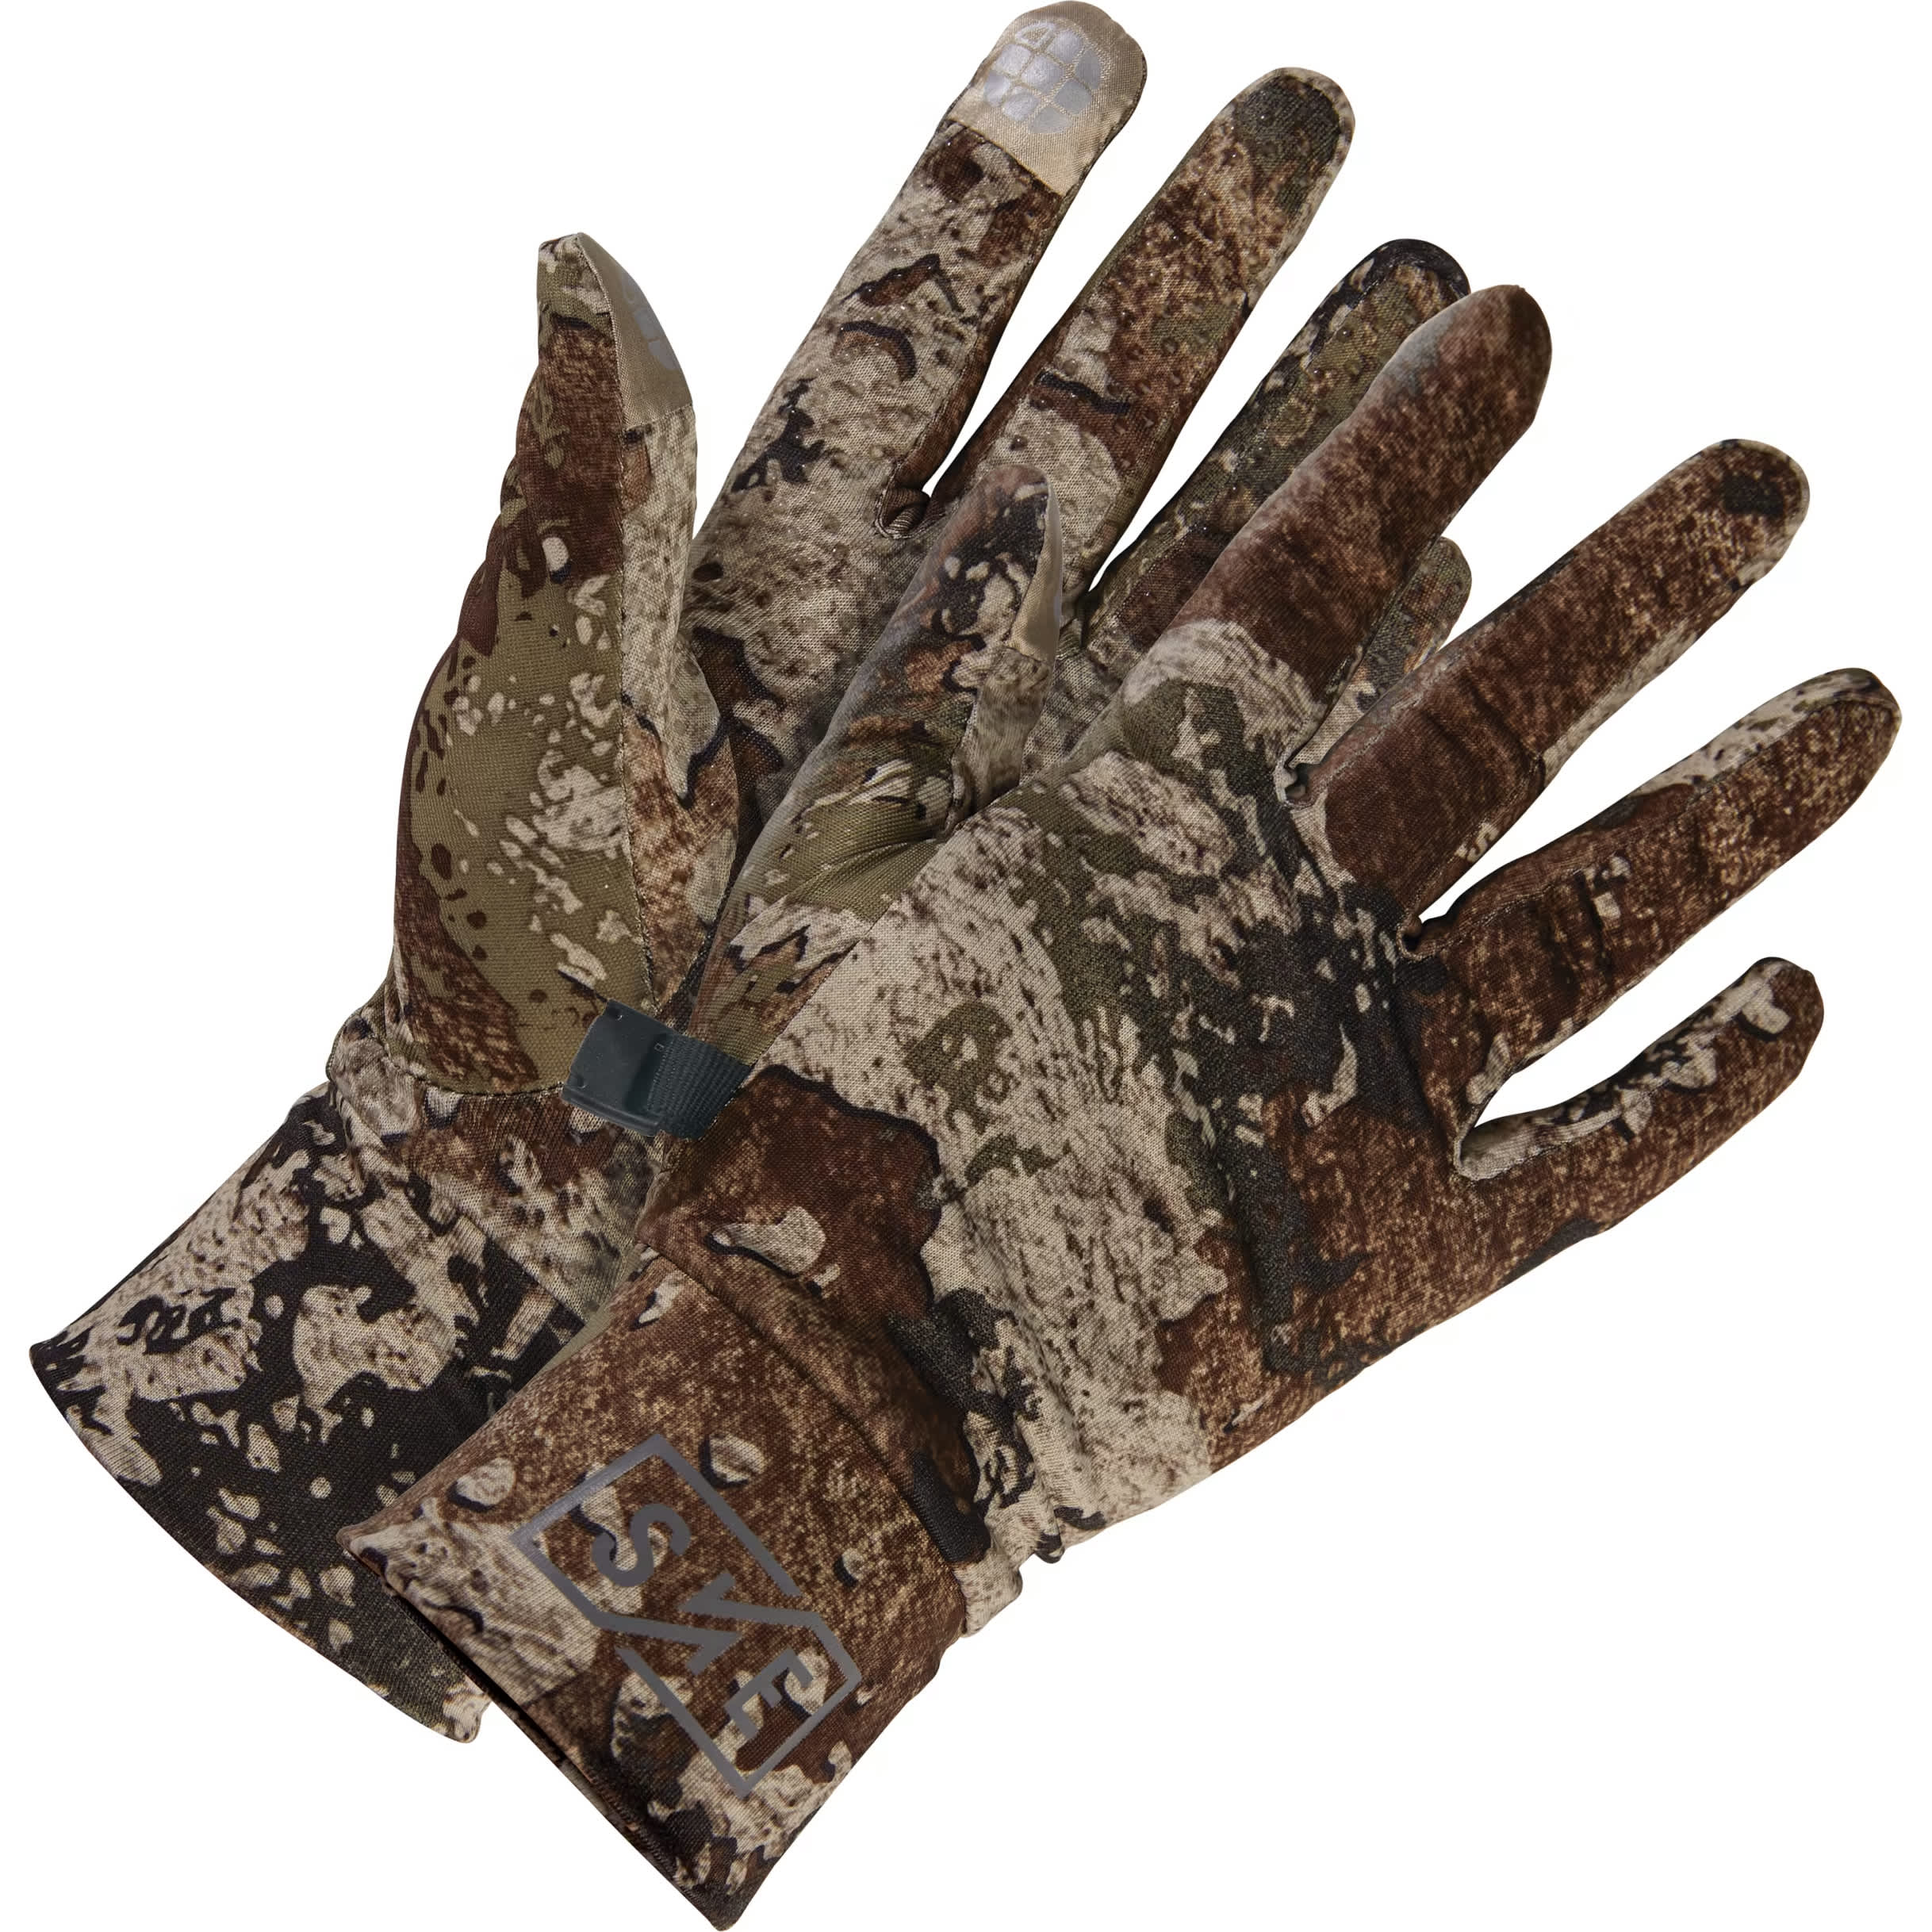 SHE Outdoor® Women’s Camoskinz Liner Gloves